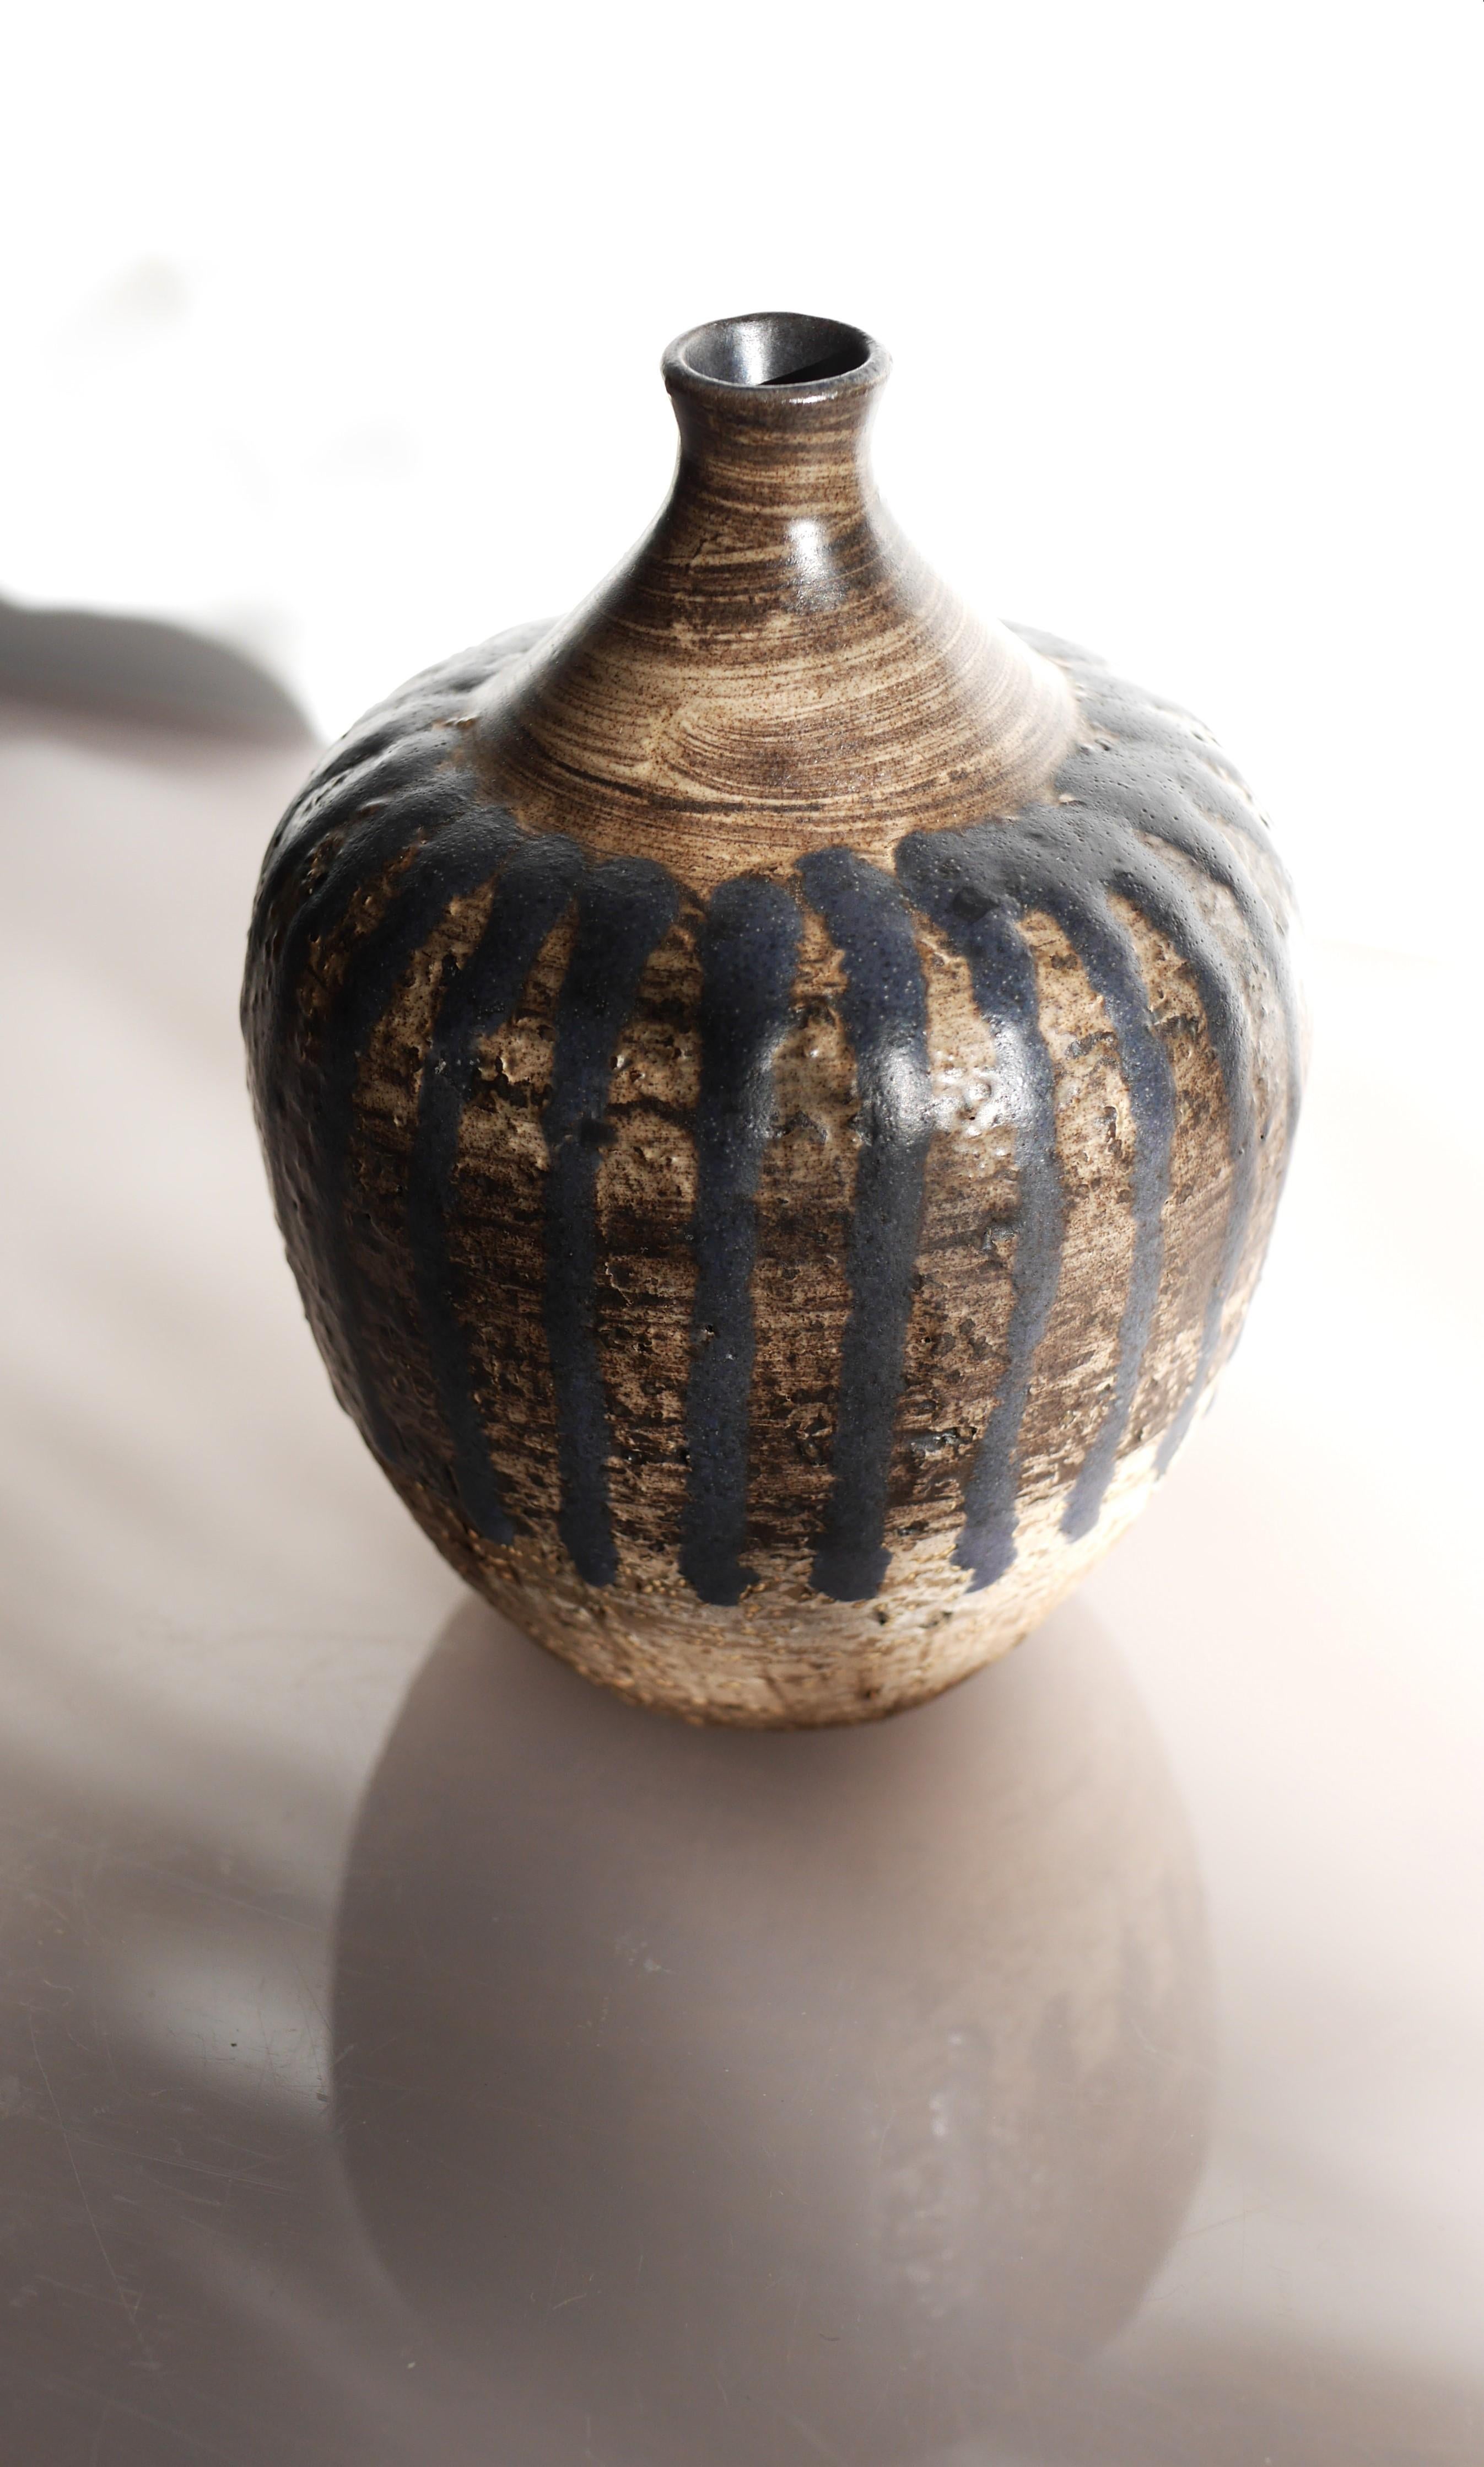 A fantastic vintage handmade brutalist art pottery vase made by the talented and well-known artist Mari Simmulson for equally famous Upsala Ekeby in the 60s. It has a dark brown base with fantastic details in the graphic patterns and will be an